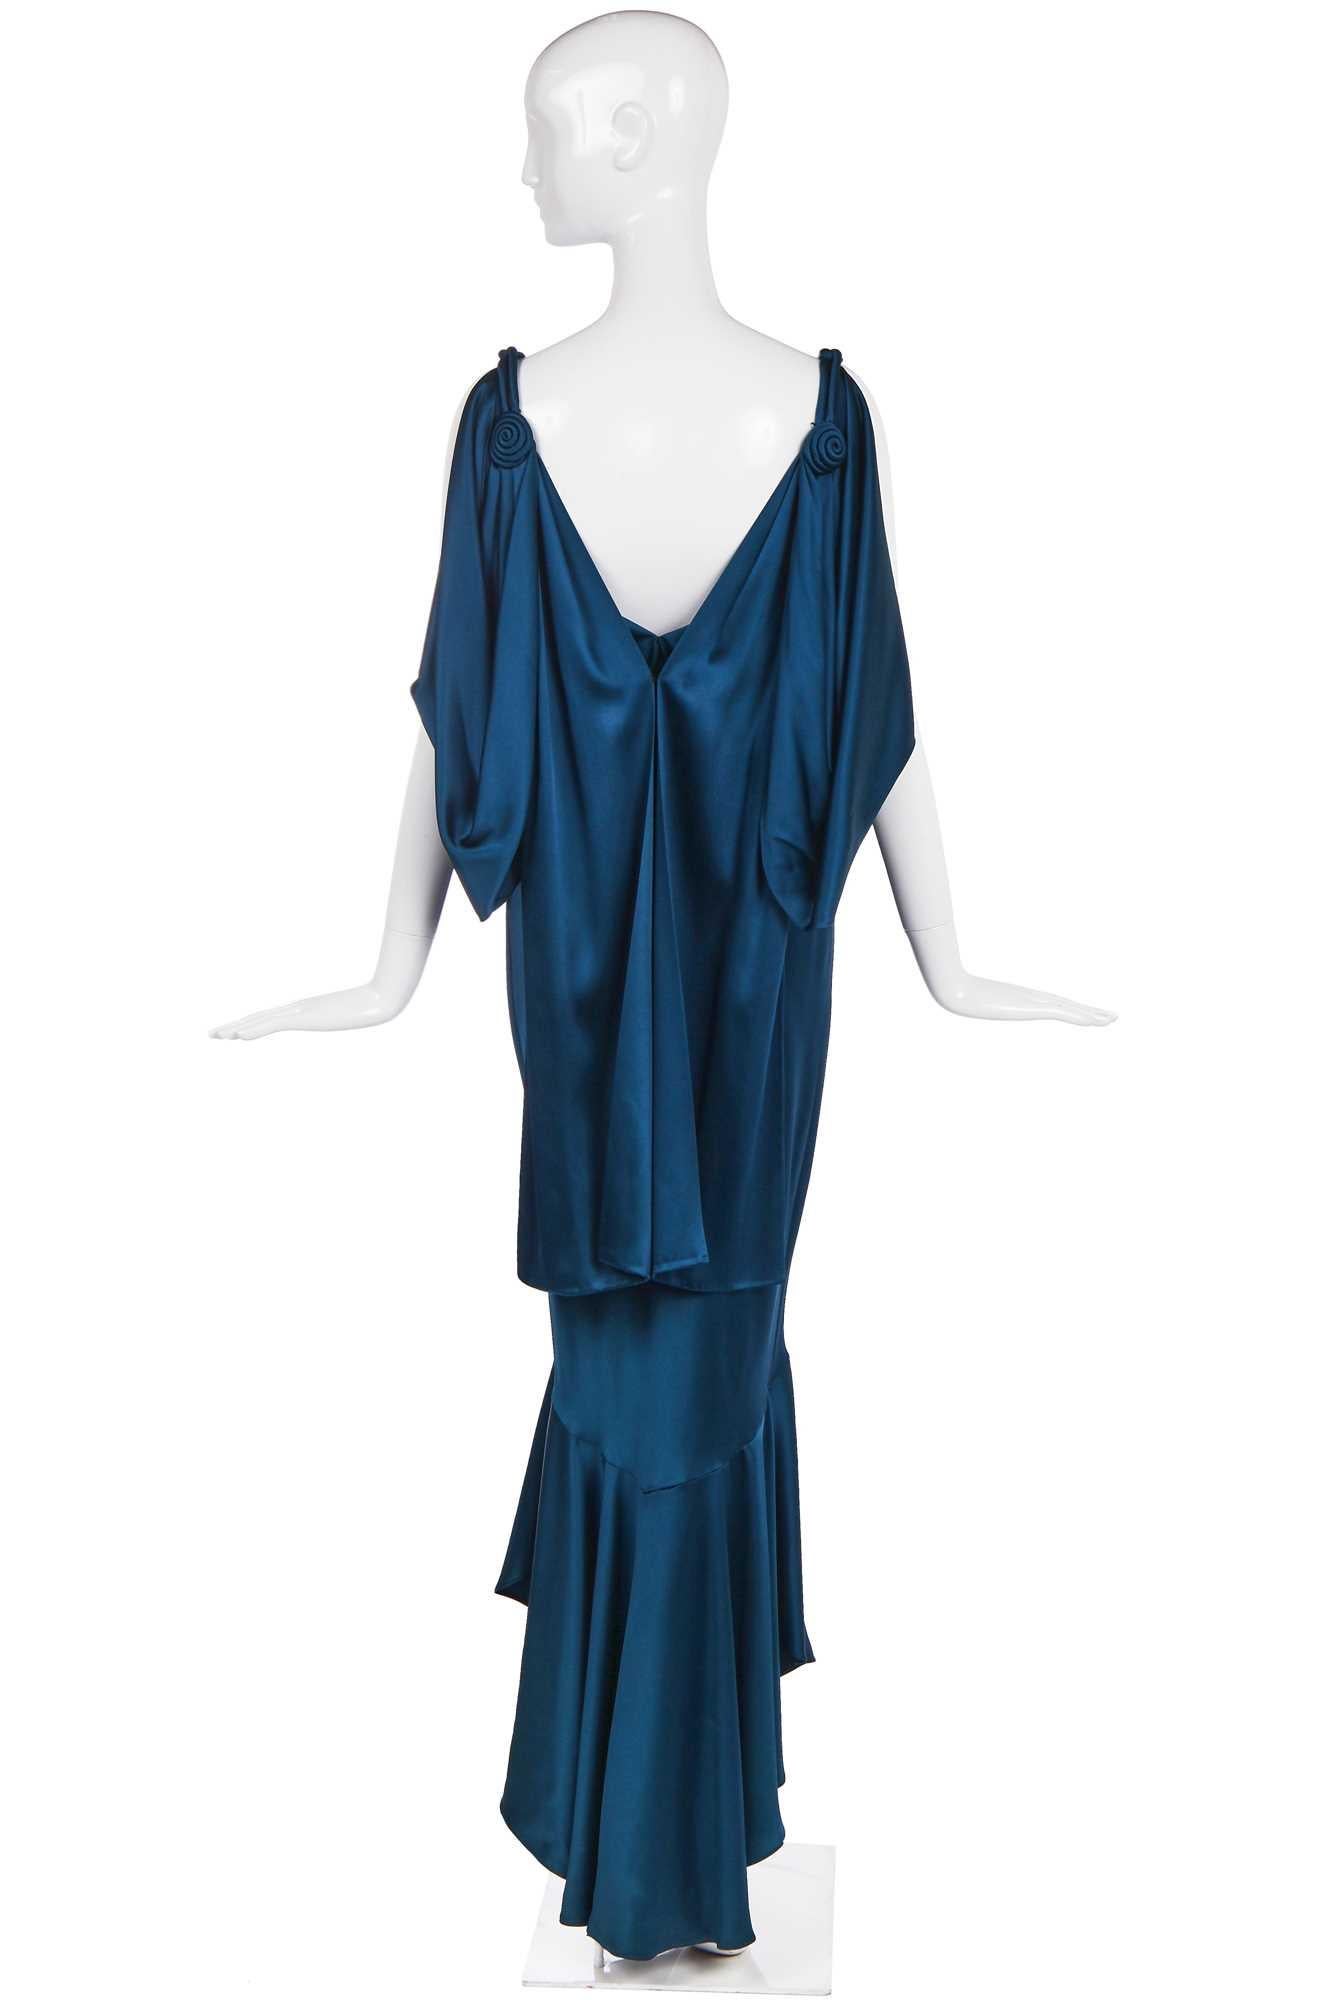 JOHN GALLIANO Teal Bias Cut Satin Evening Gown From The A/W 2008 Collection In Excellent Condition For Sale In London, GB